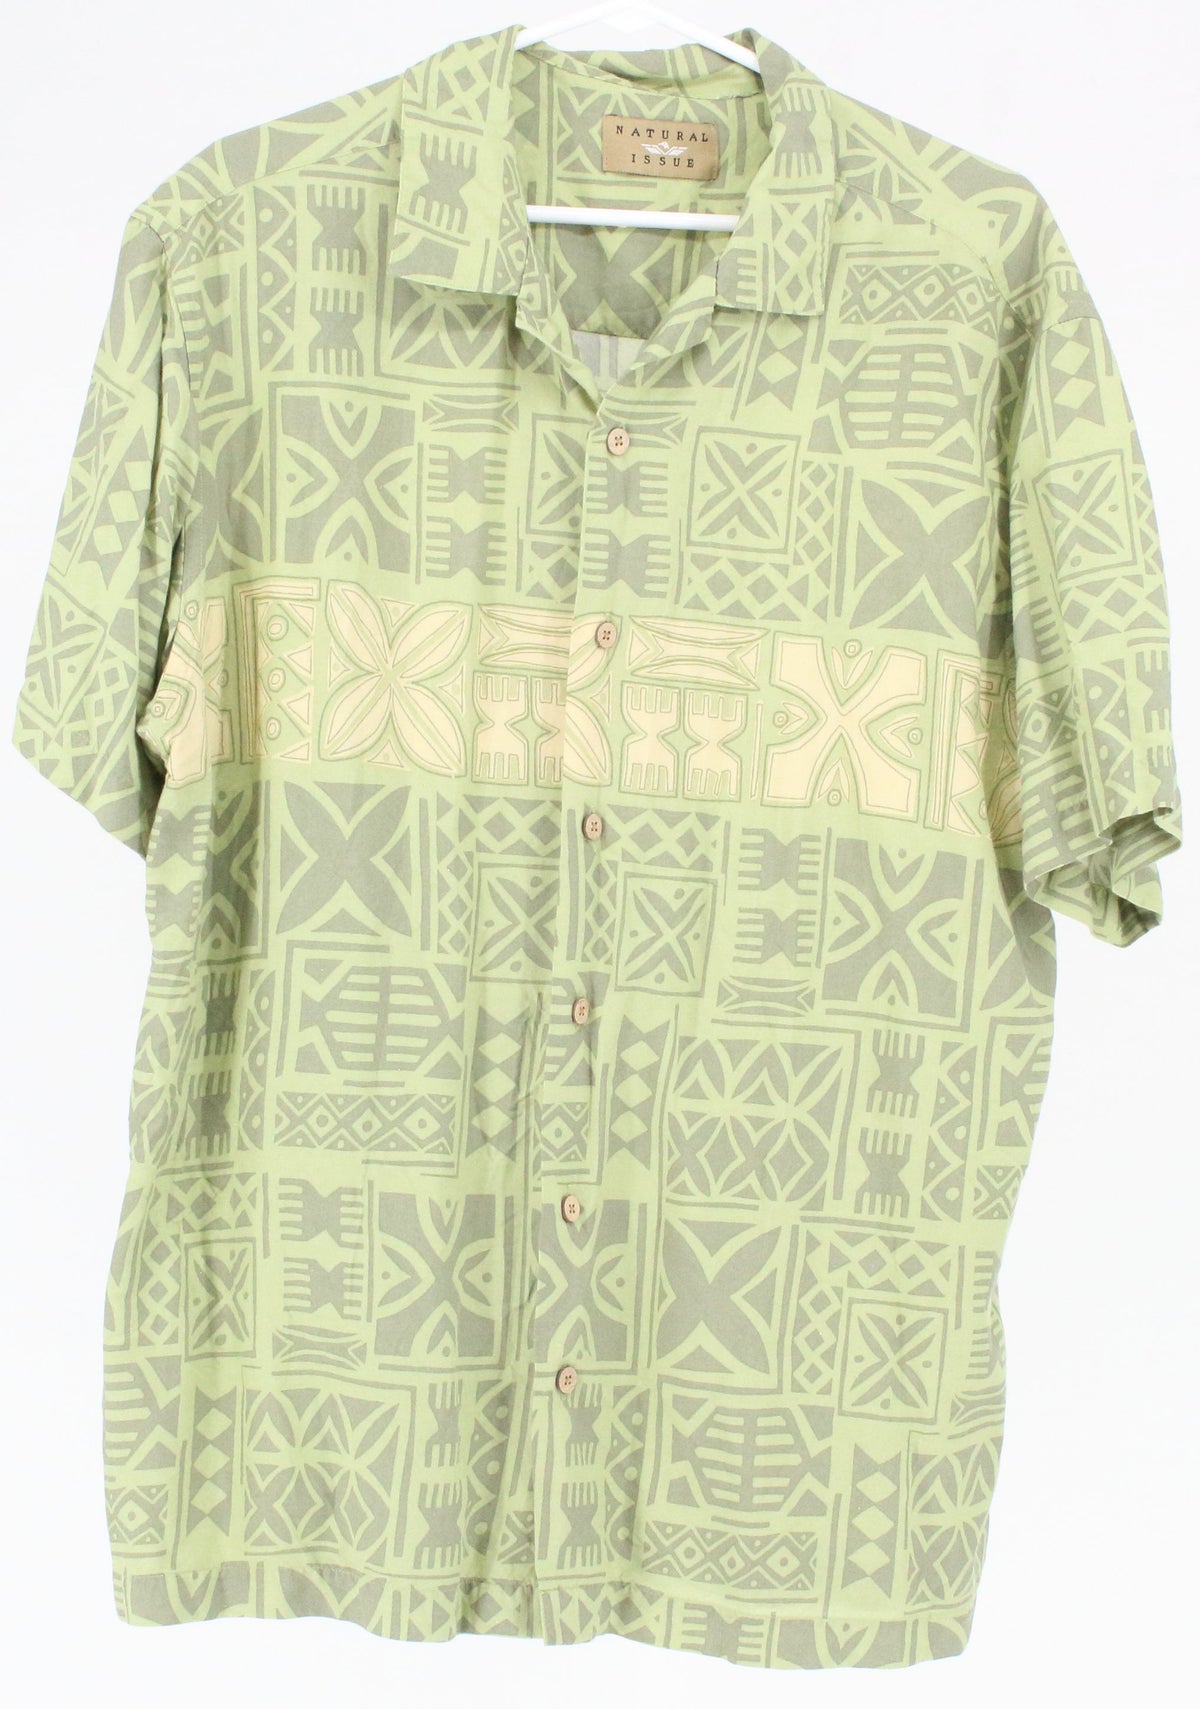 Natural Issue Green Printed Button-Up Short Sleeve Shirt